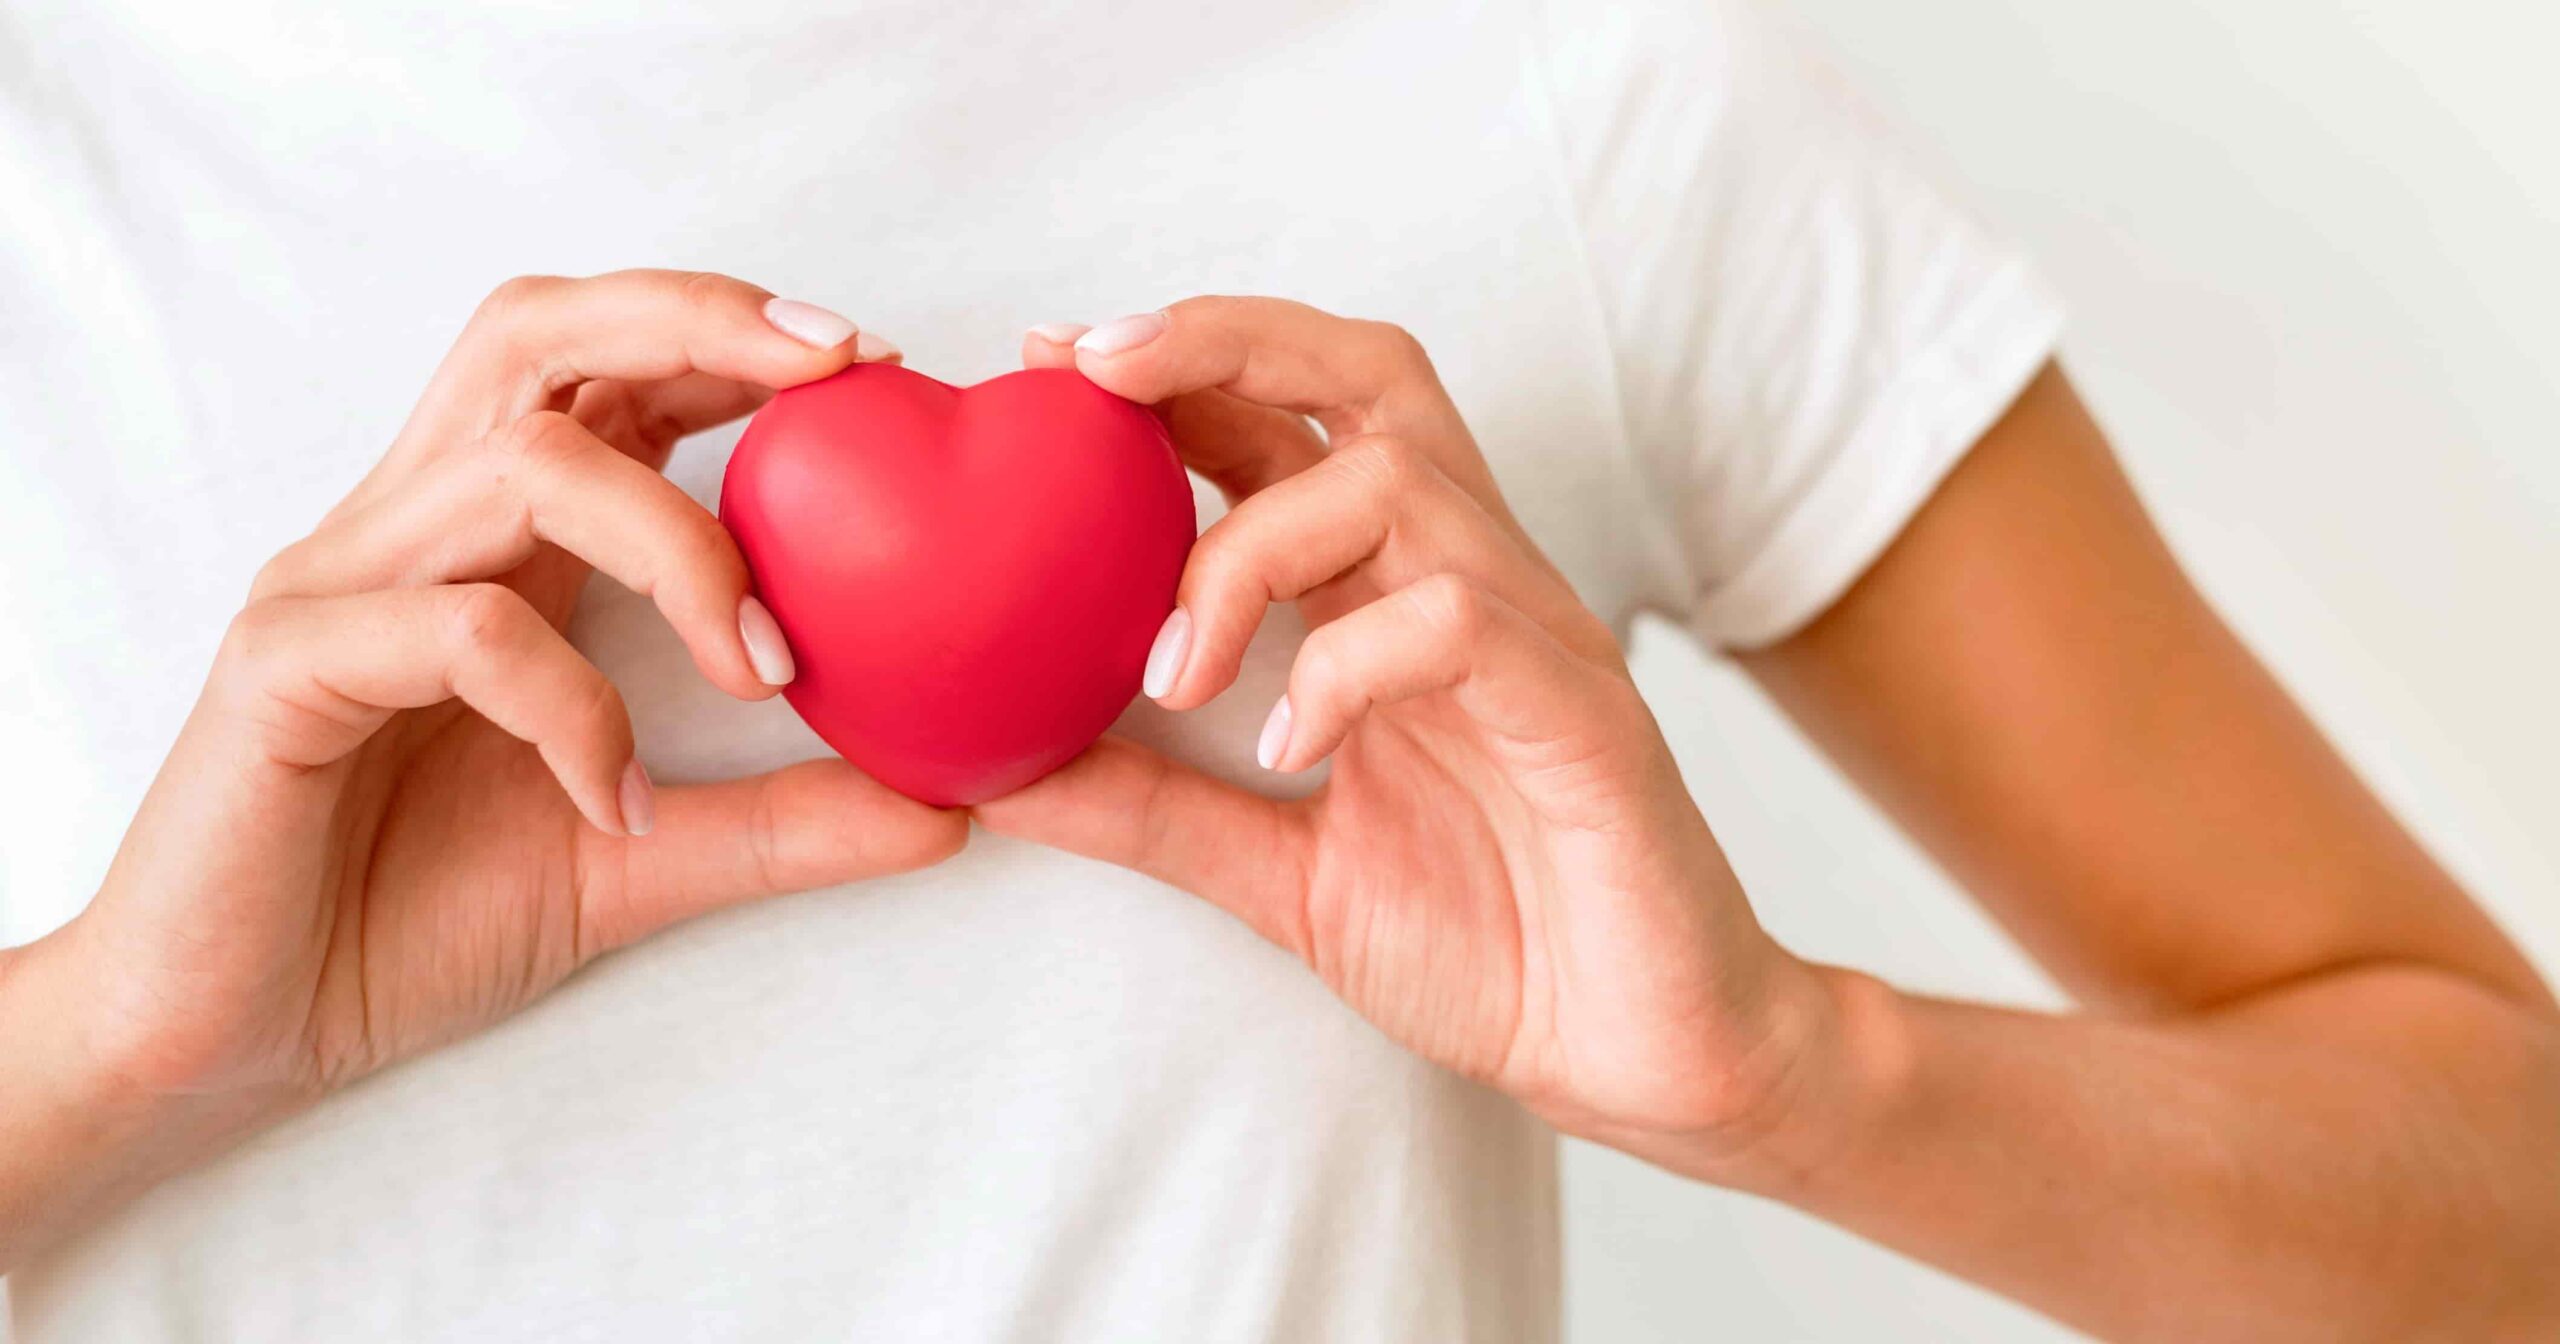 How to Lower LDL Cholesterol Naturally?